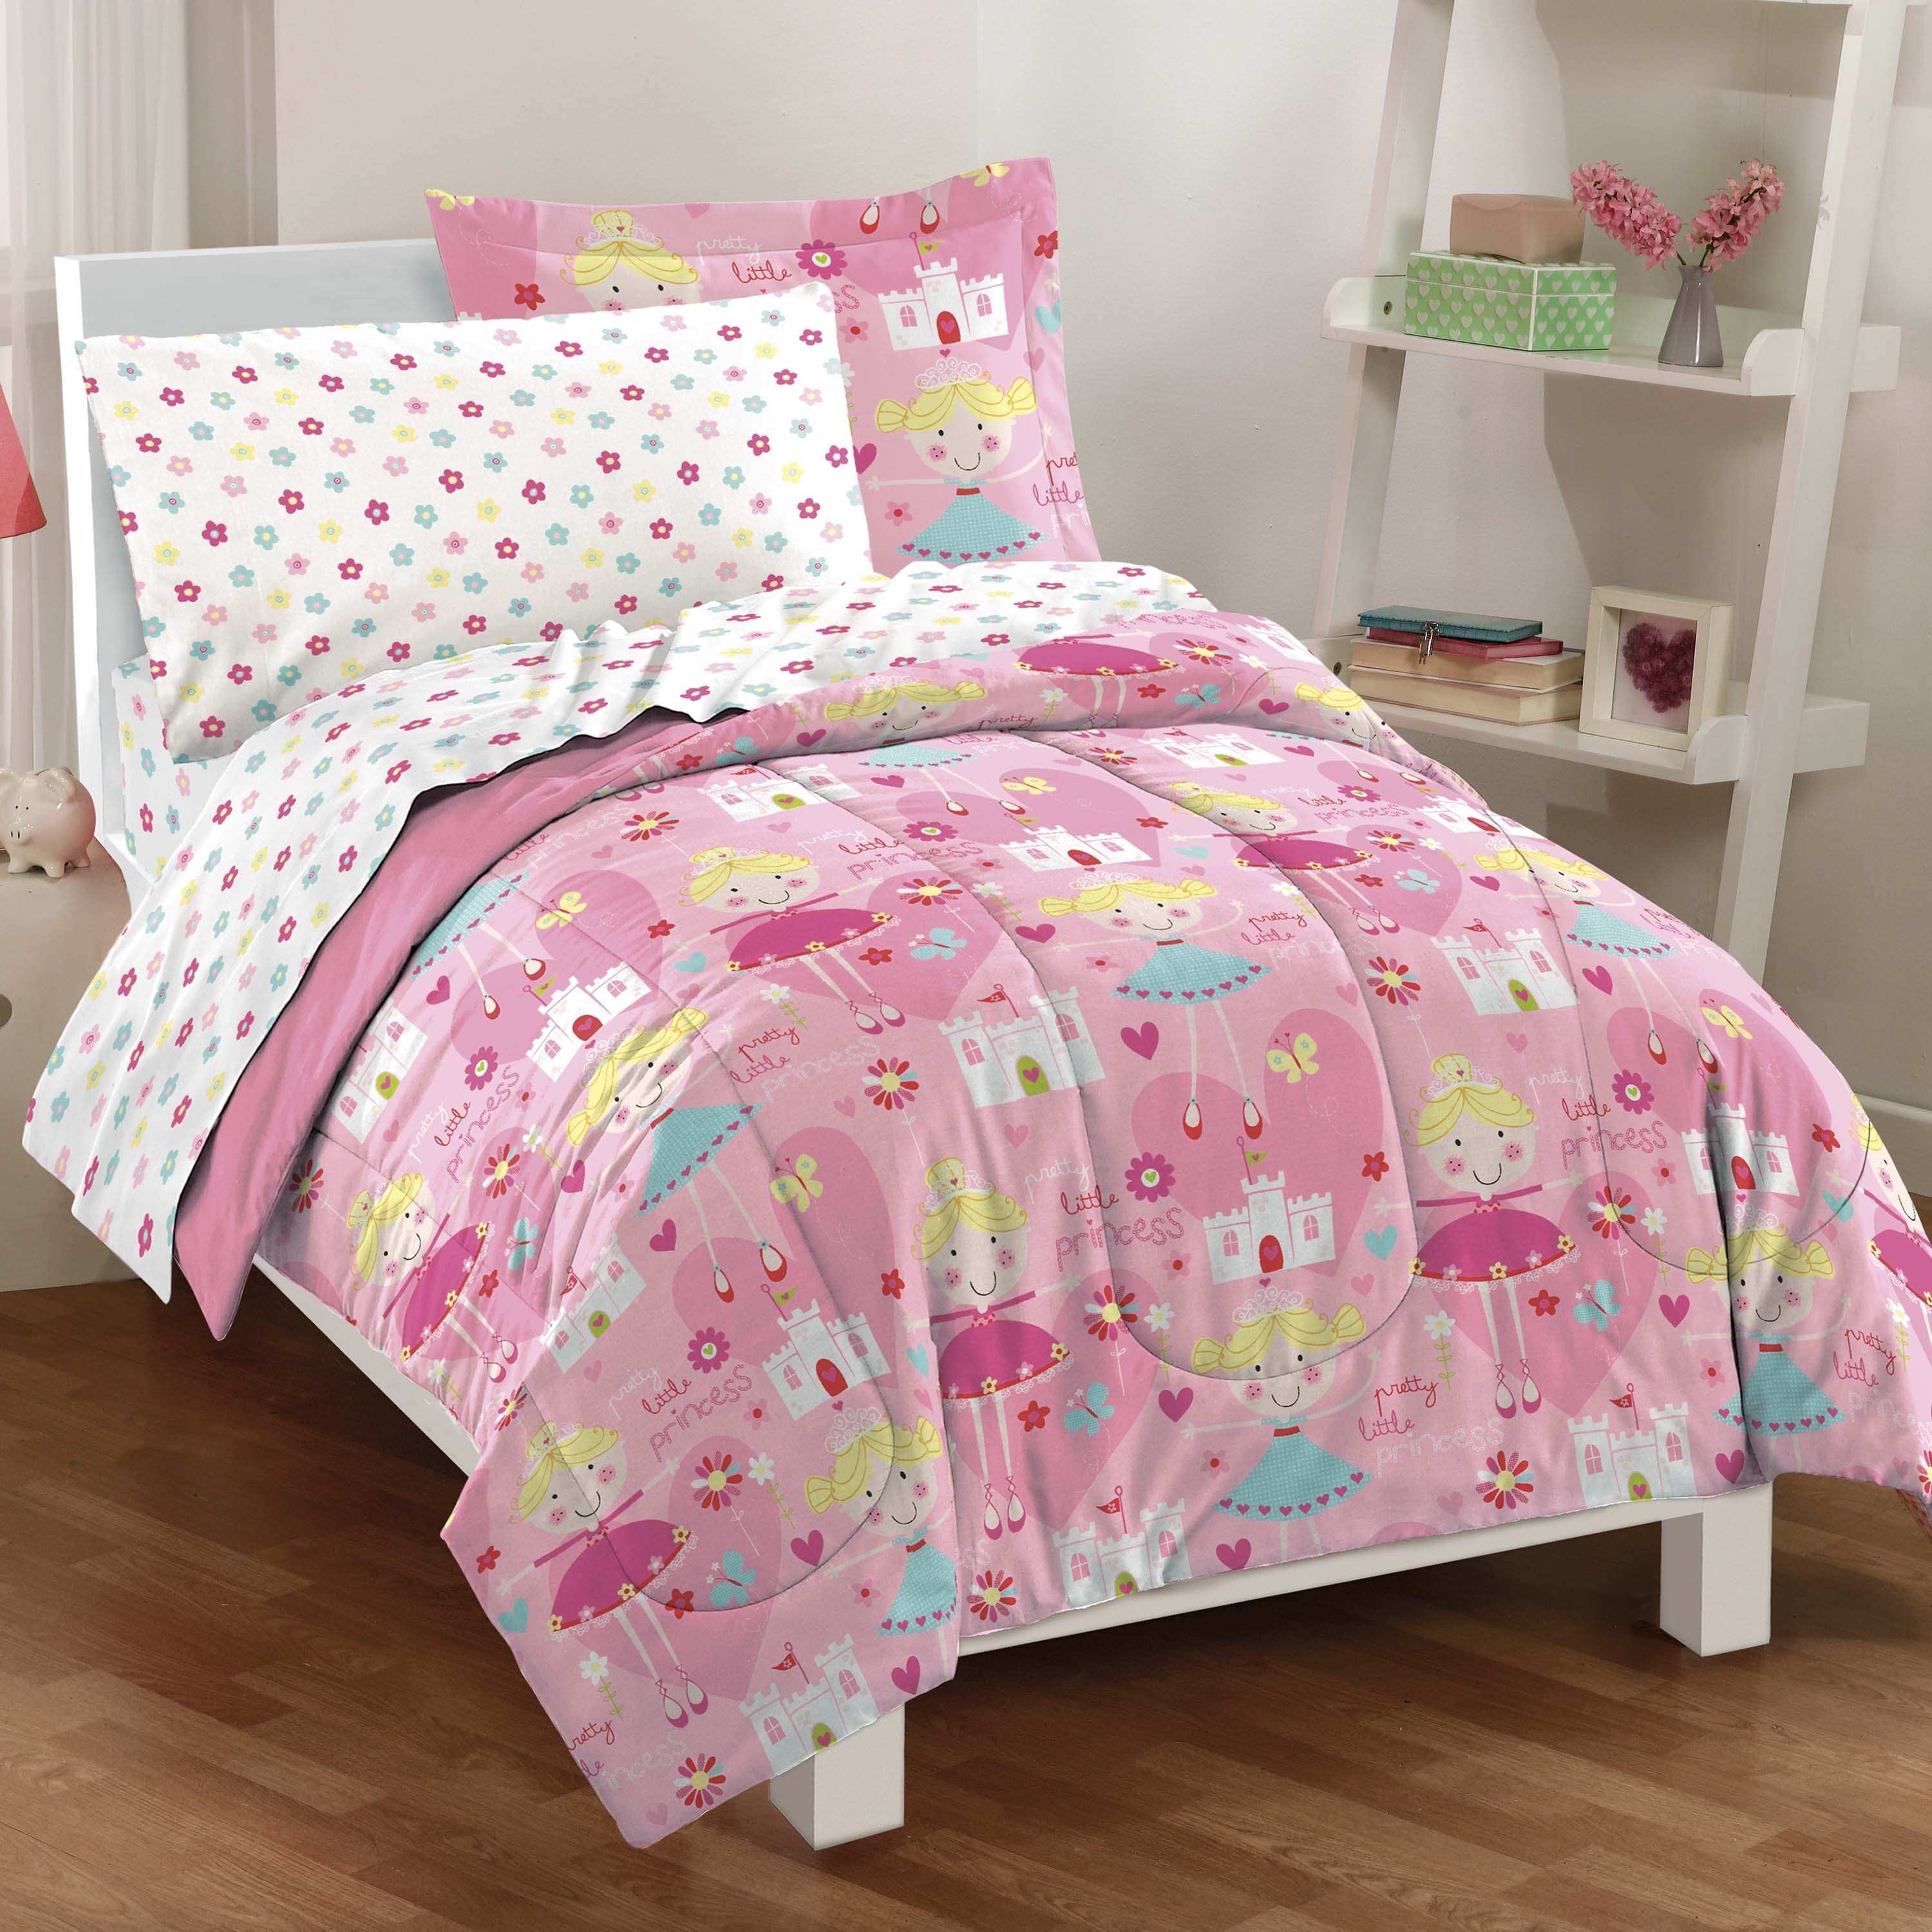 Dream Factory Pretty Princess 7 Piece Bed In A Bag With Sheet Set On Sale Overstock 8625231